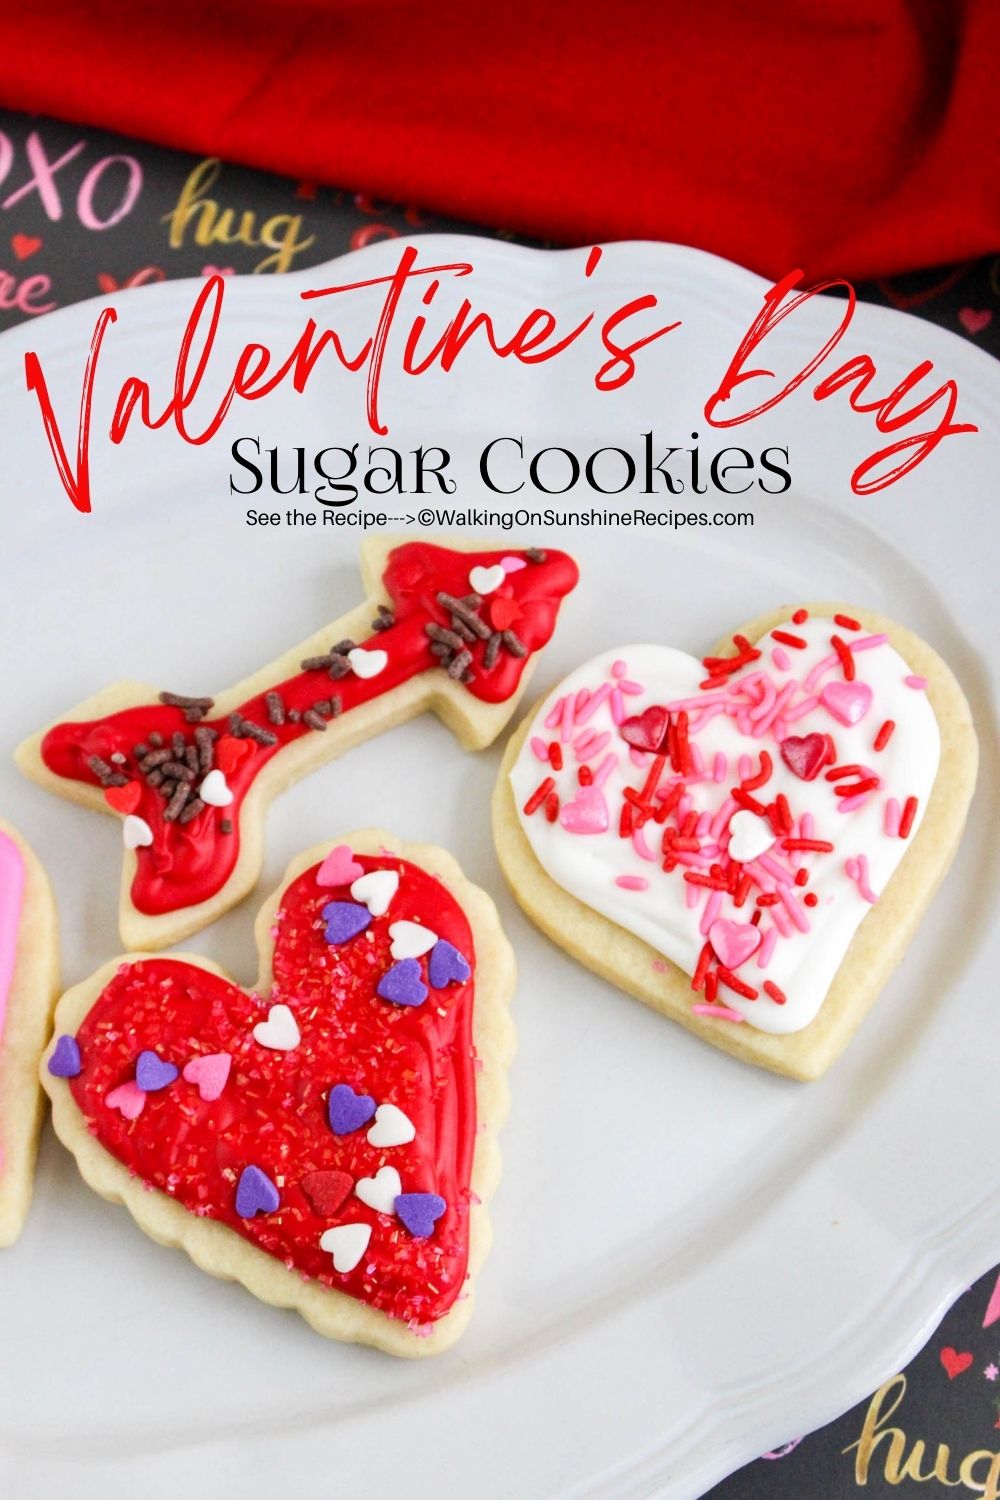 Sugar cookies in the shape of hearts and a cupid's arrow on white plate. 